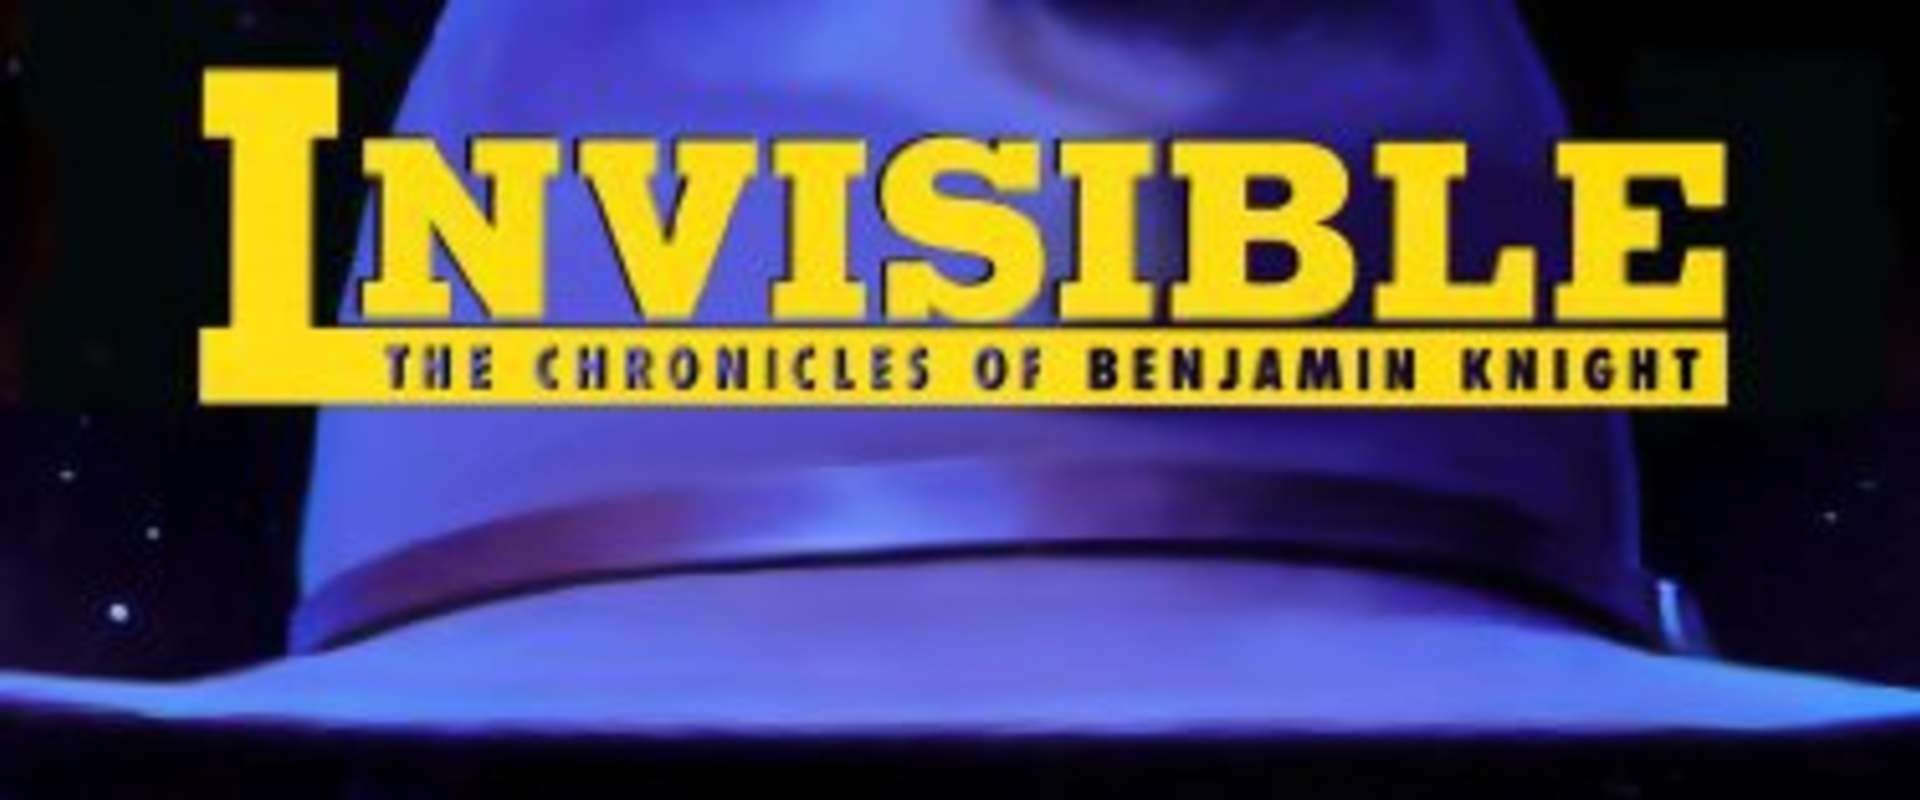 Invisible: The Chronicles of Benjamin Knight background 1